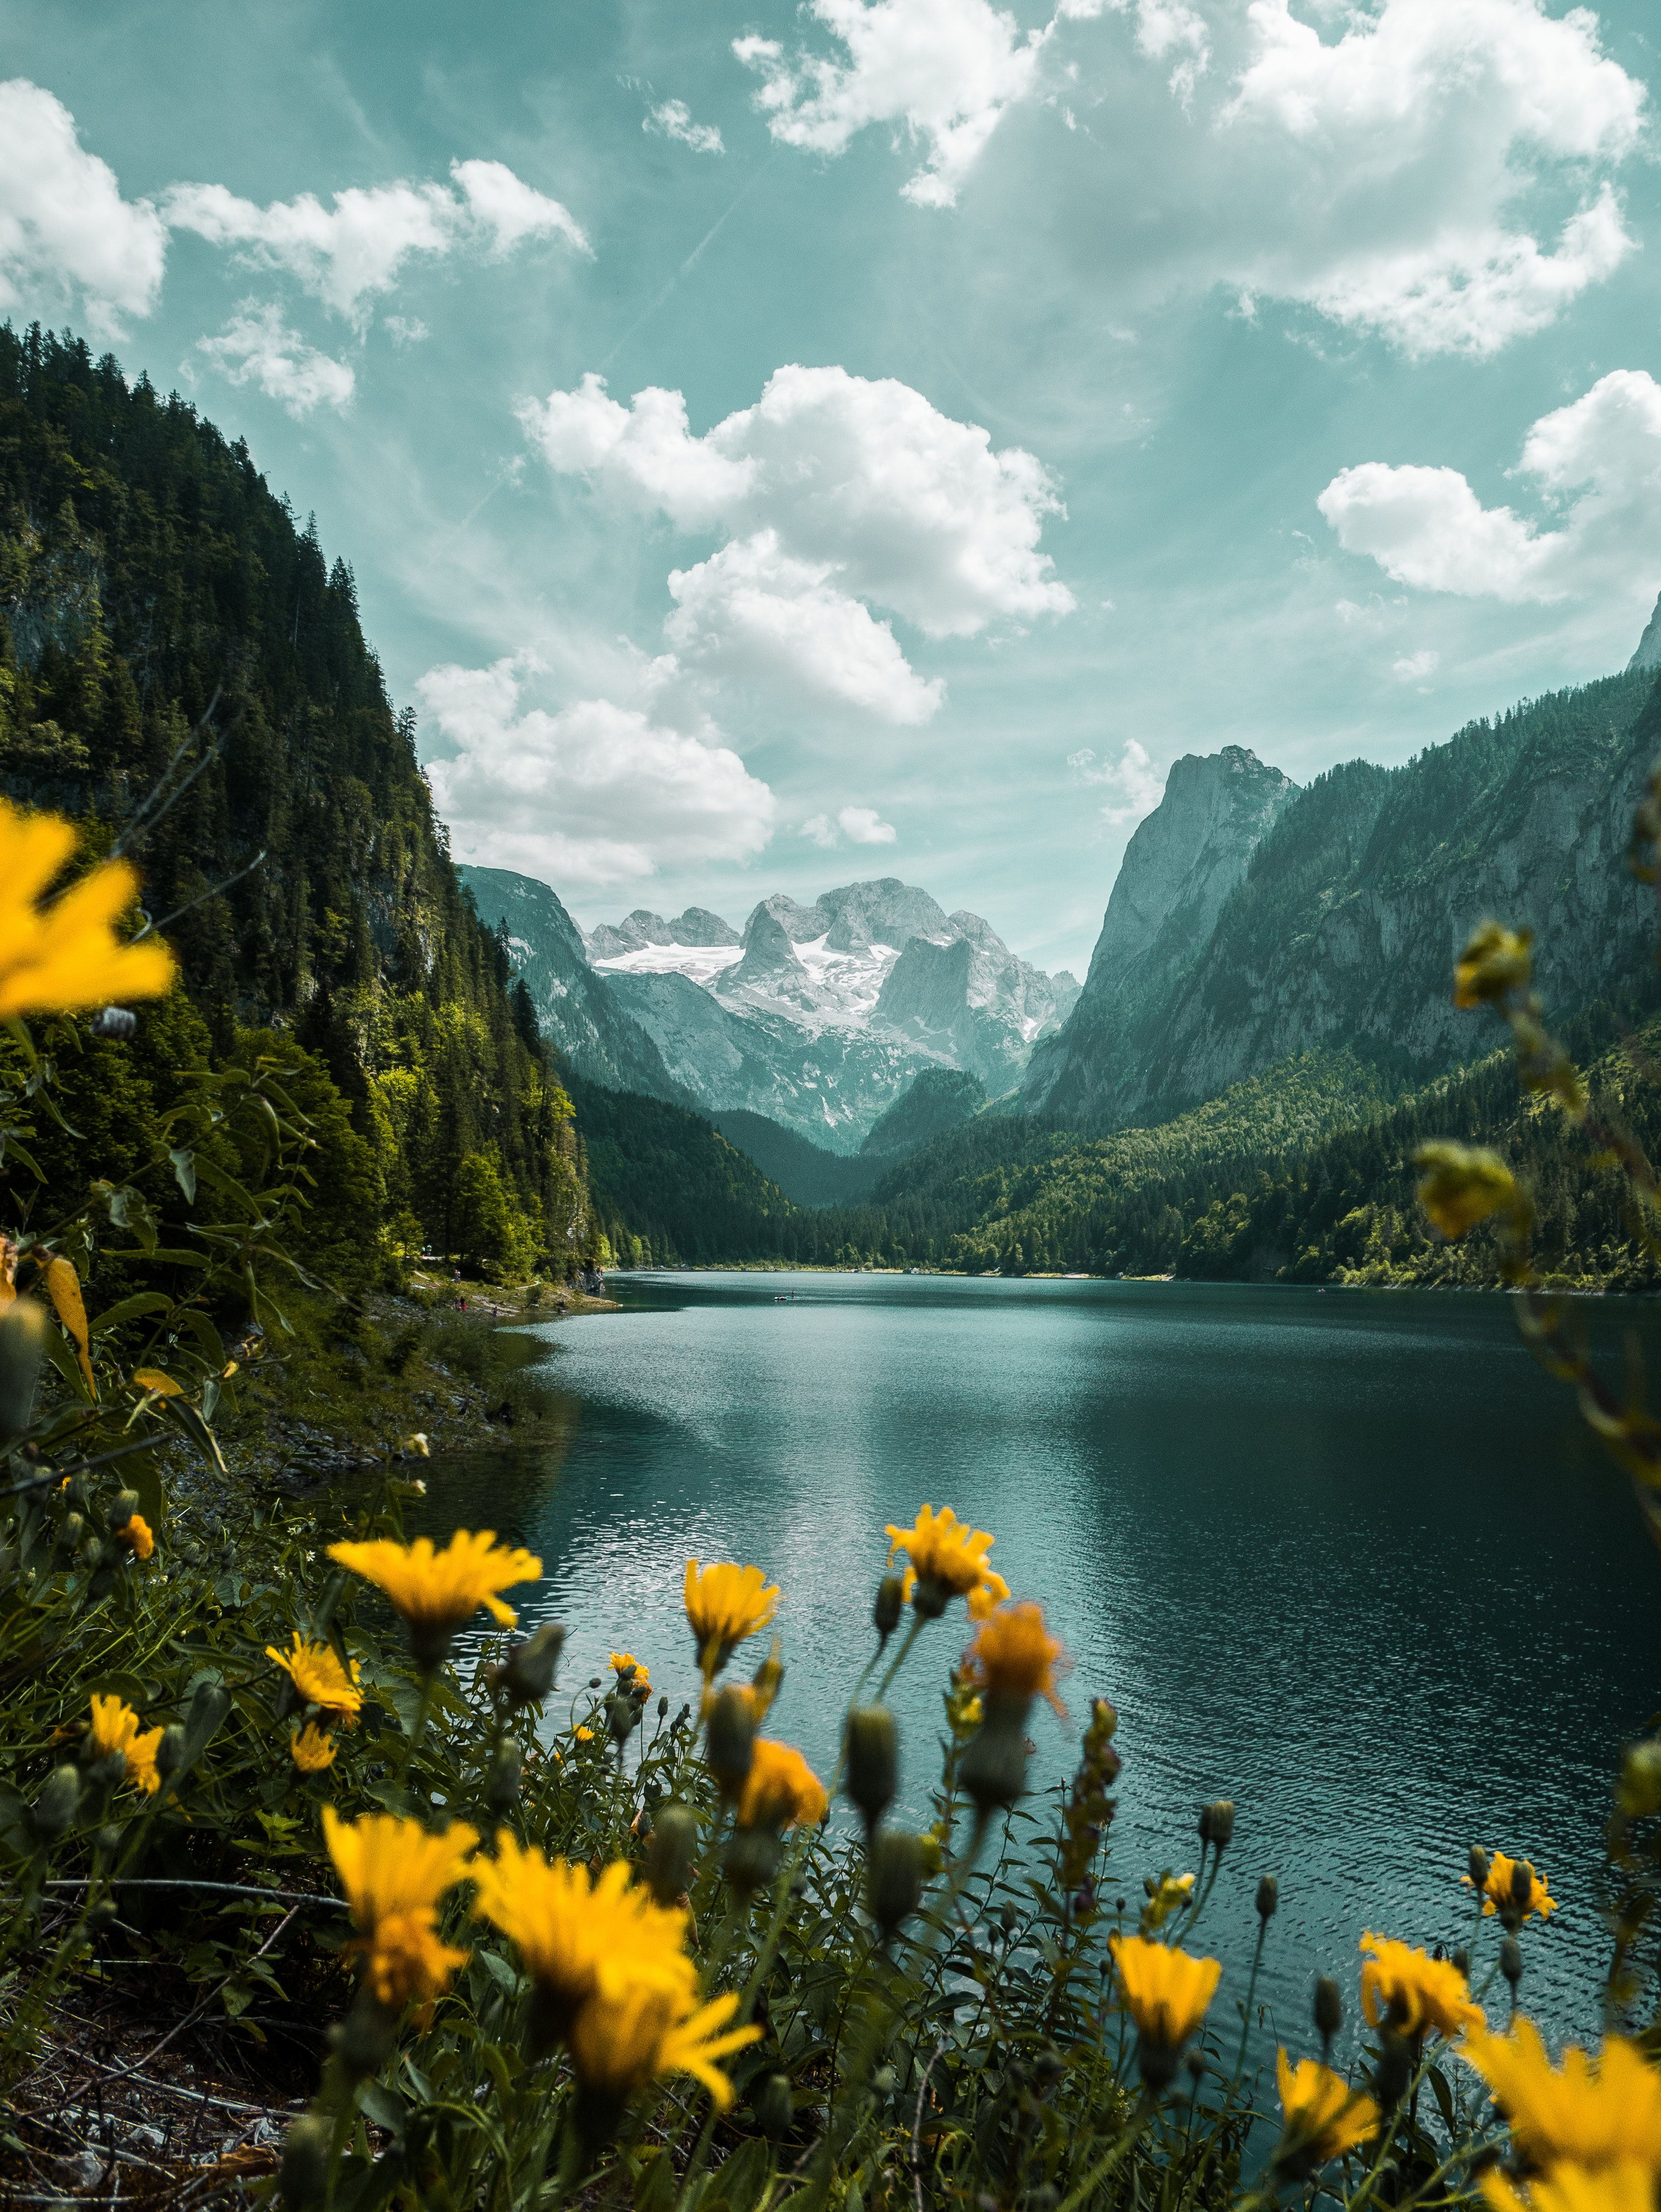 A landscape of a lake surrounded by mountains with yellow flowers in the foreground. - Lake